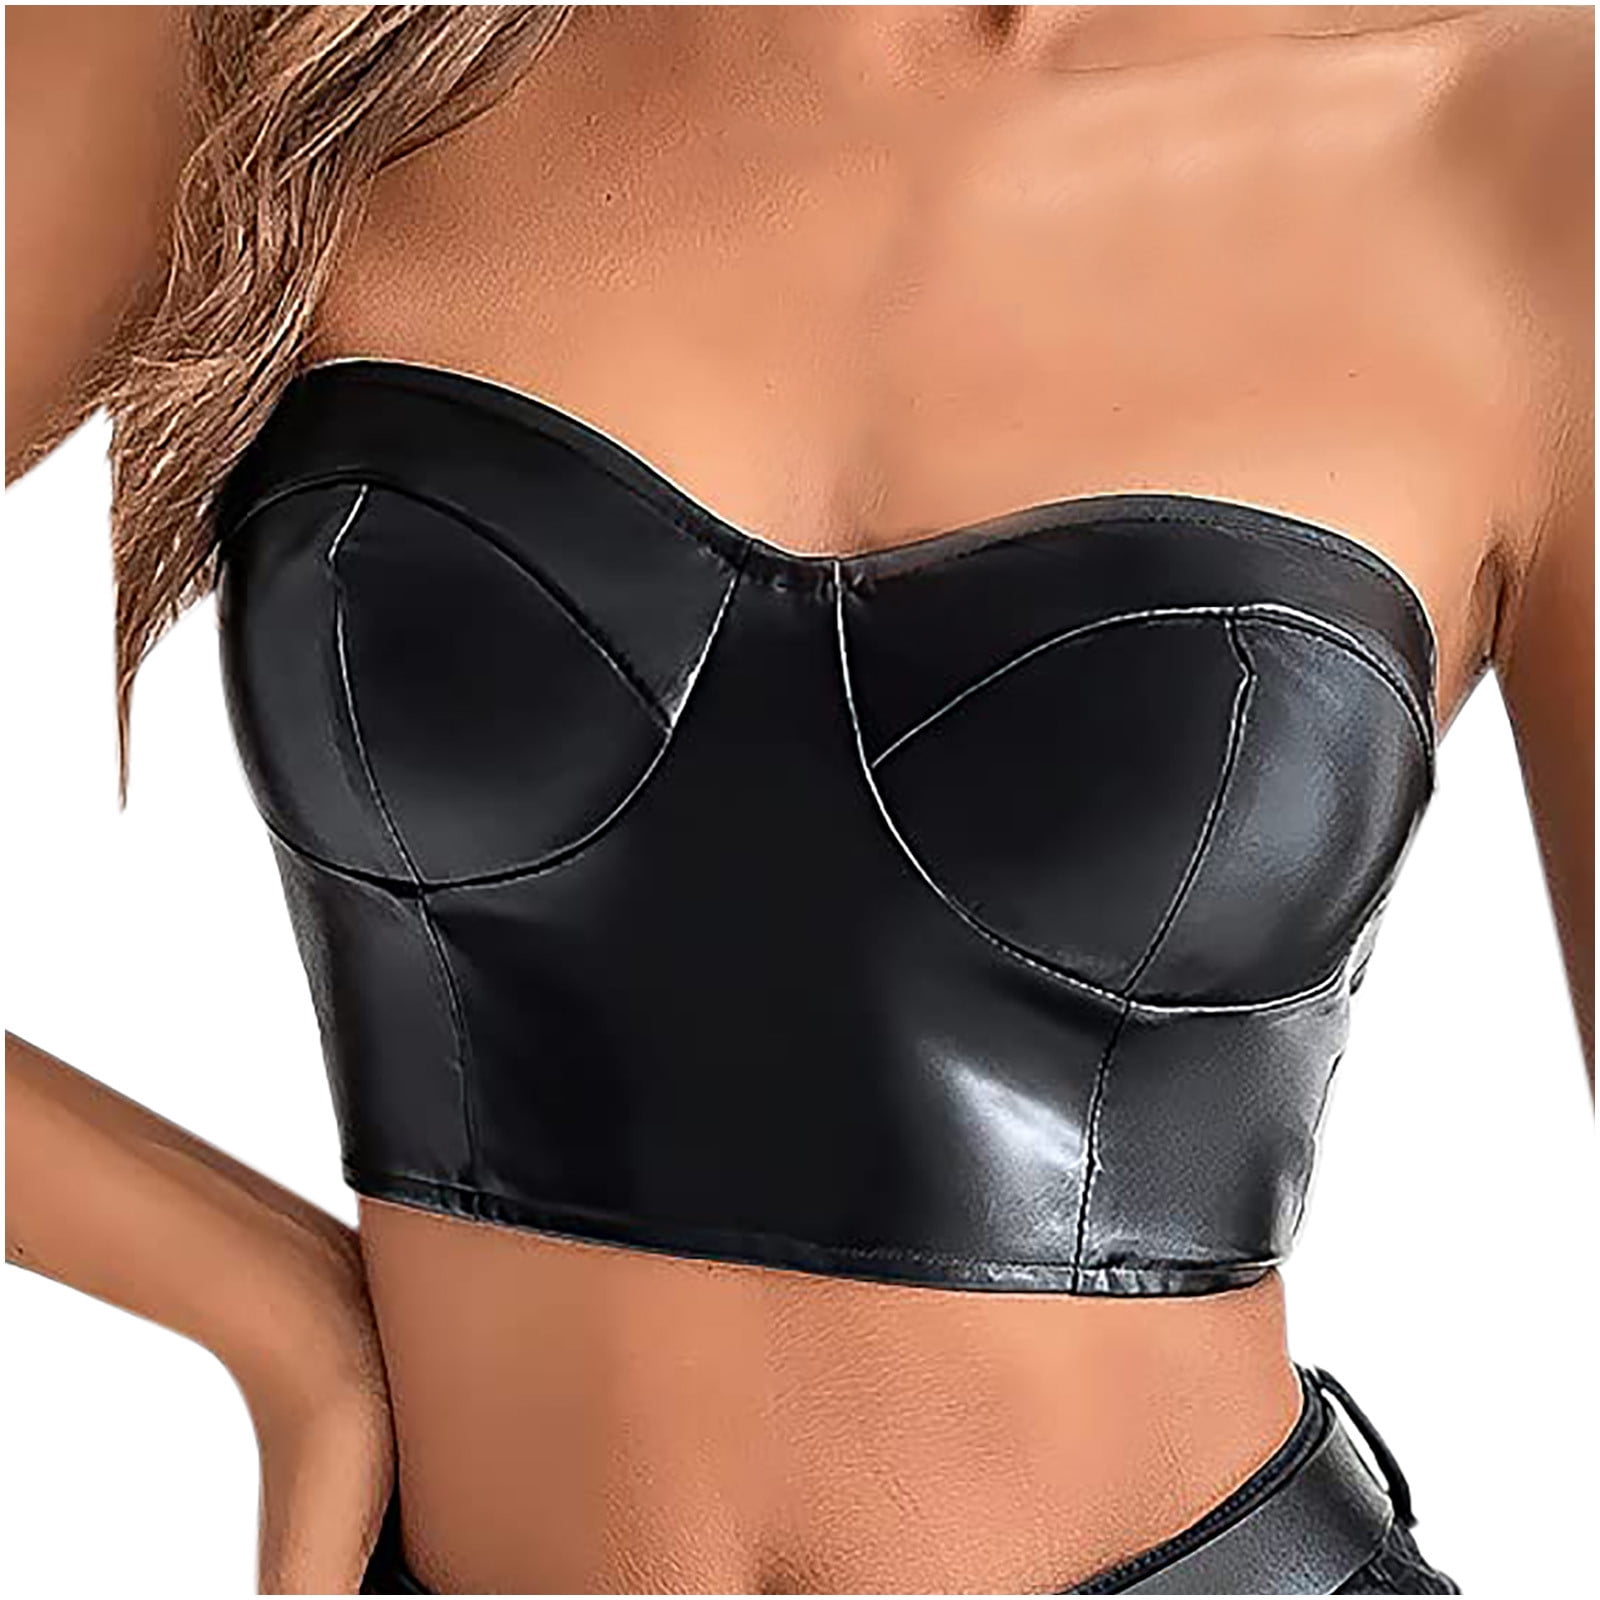 solacol Leather Lingerie for Women for Sex Women Fashion Sexy Breast Wrap Tanks Artificial Leather Underwear Lingerie Sex Lingerie Women pic pic